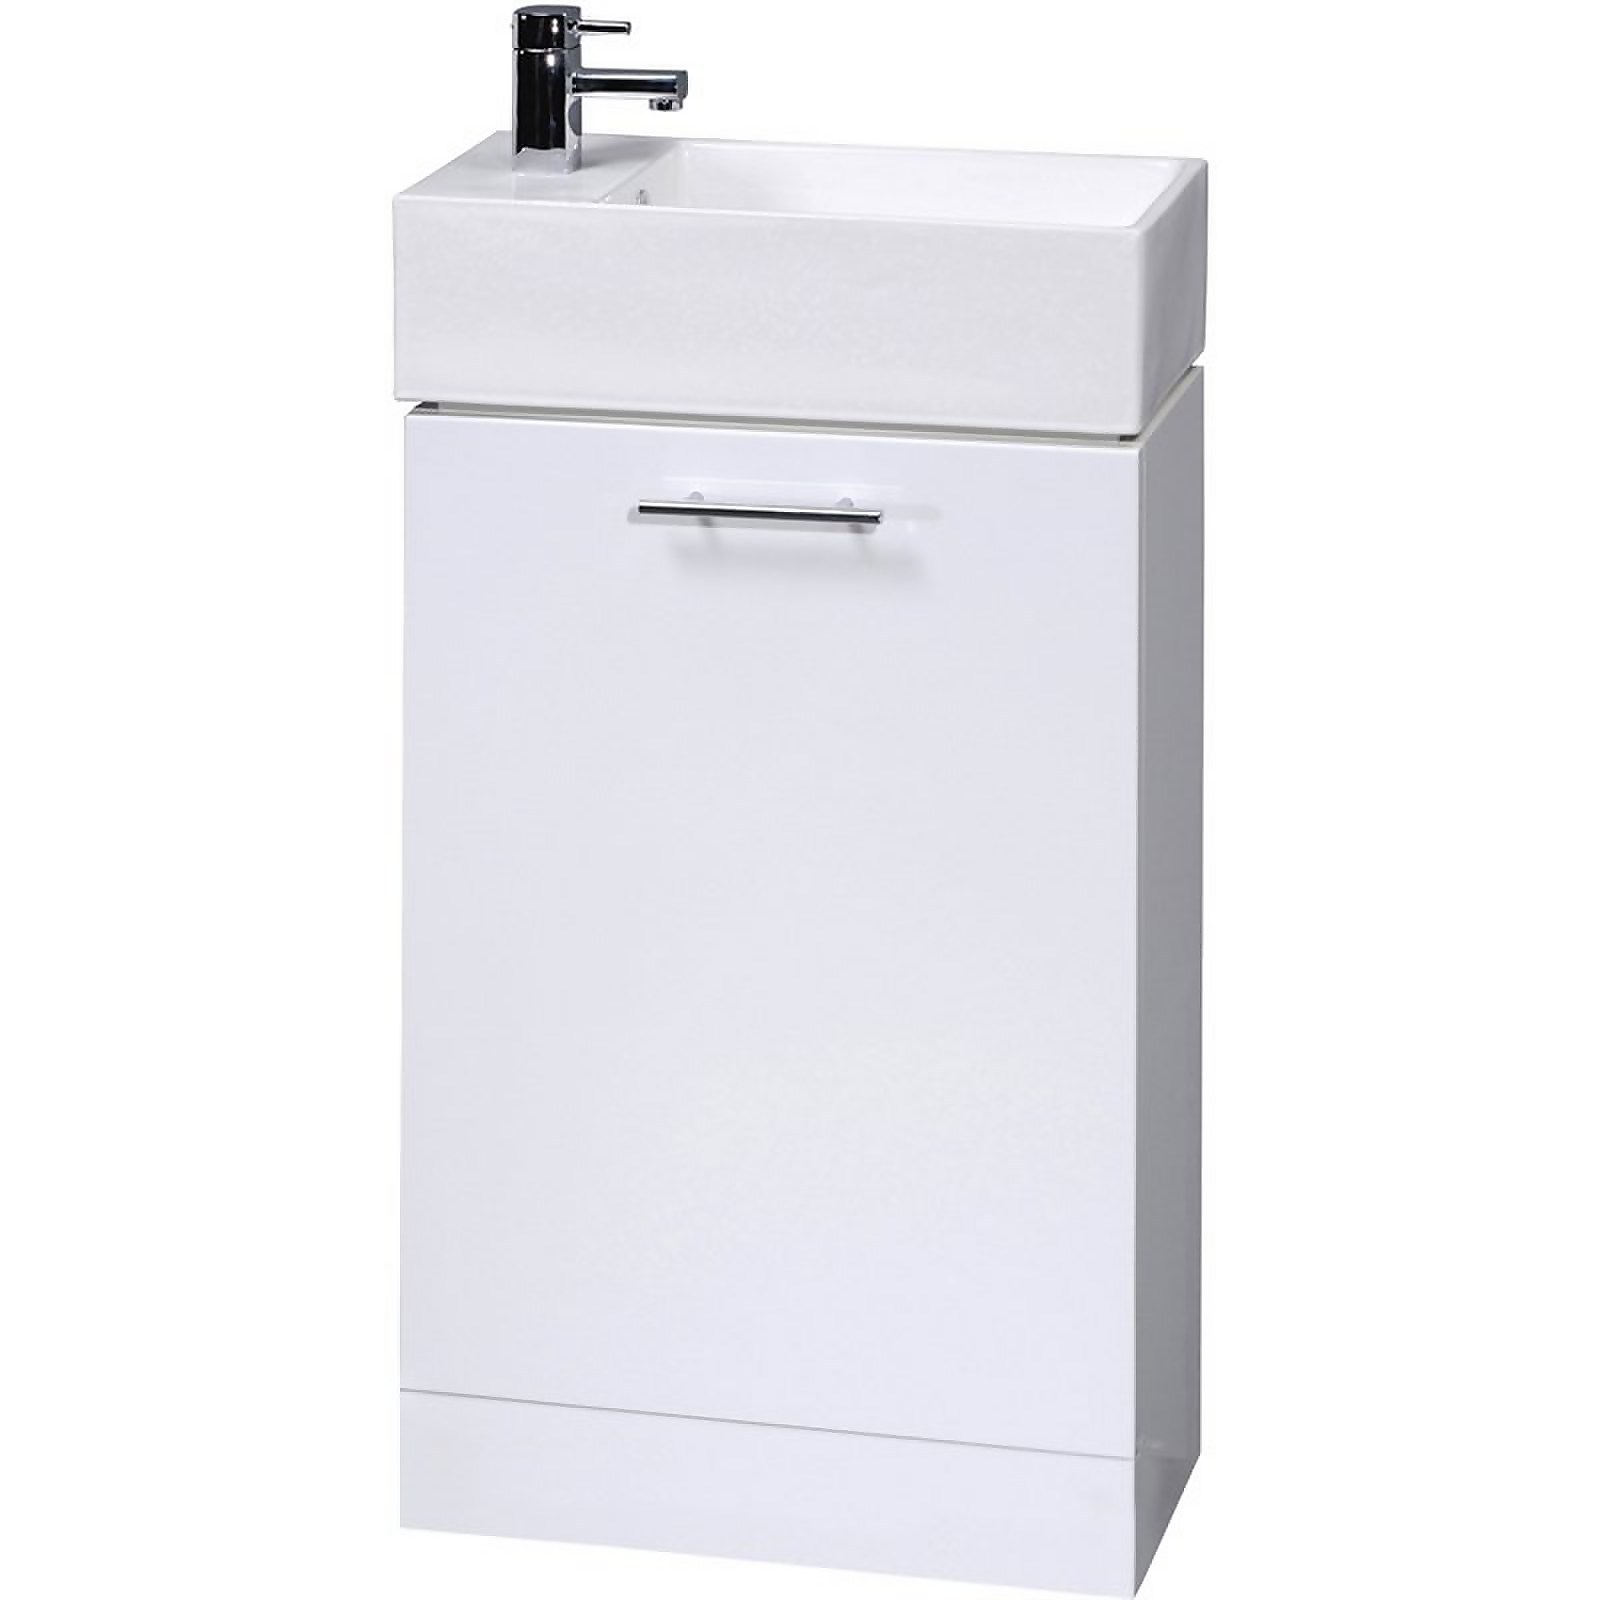 Photo of Balterley Orbit 480mm Compact Cabinet With Basin - Gloss White